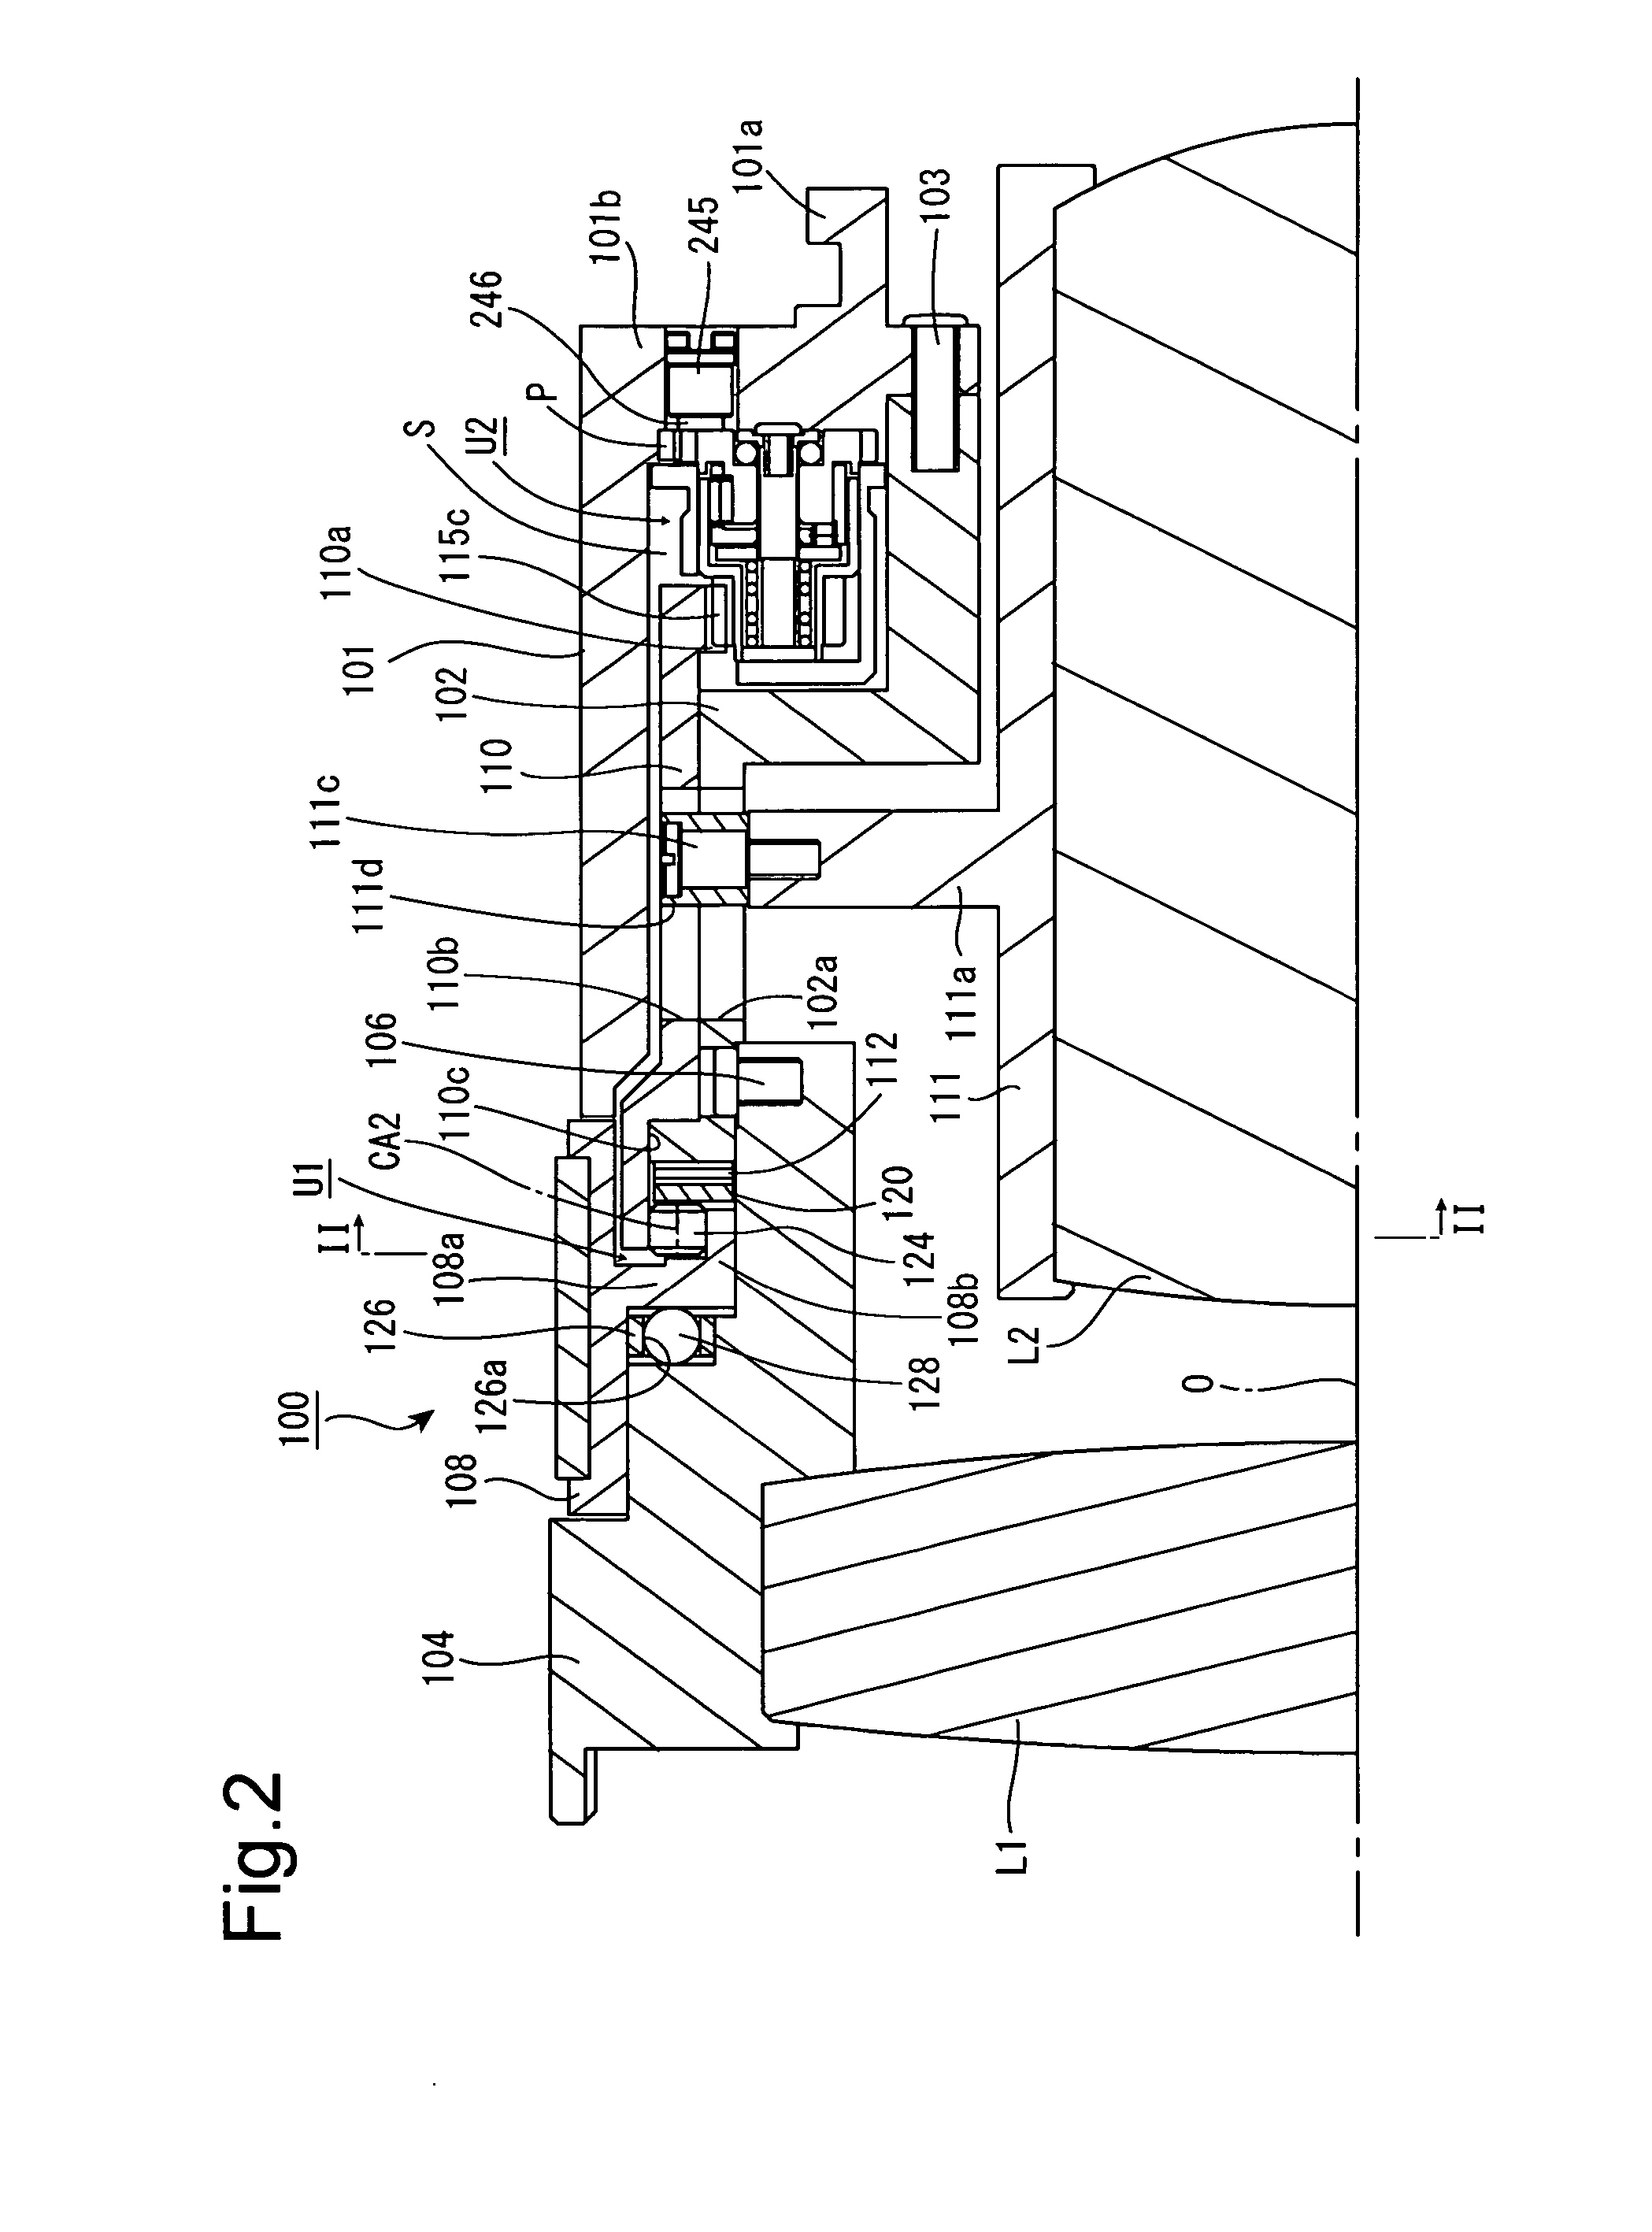 Camera system incorporating a seamless lens-drive switching mechanism